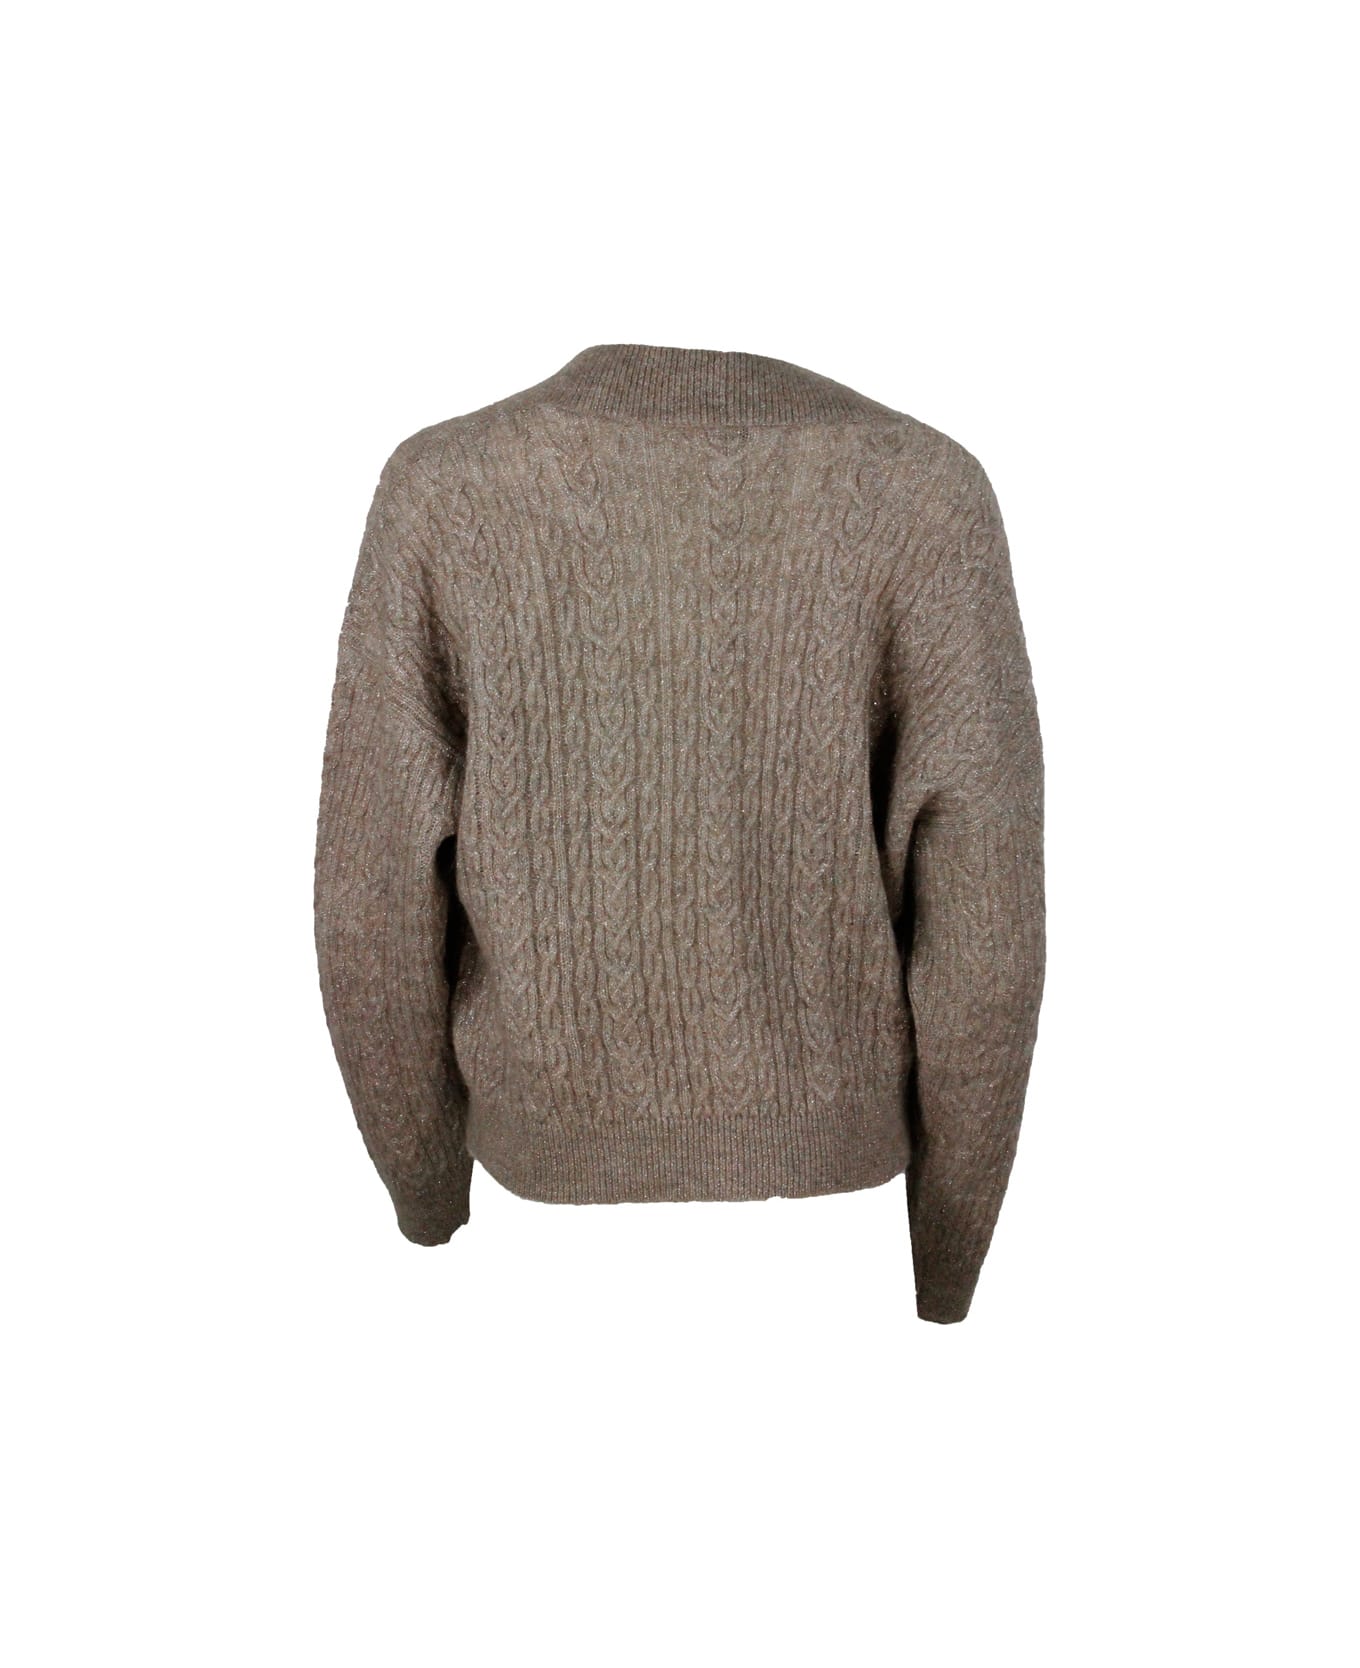 Brunello Cucinelli Cable Knit Wool Blend Cardigan Sweater - Brown カーディガン